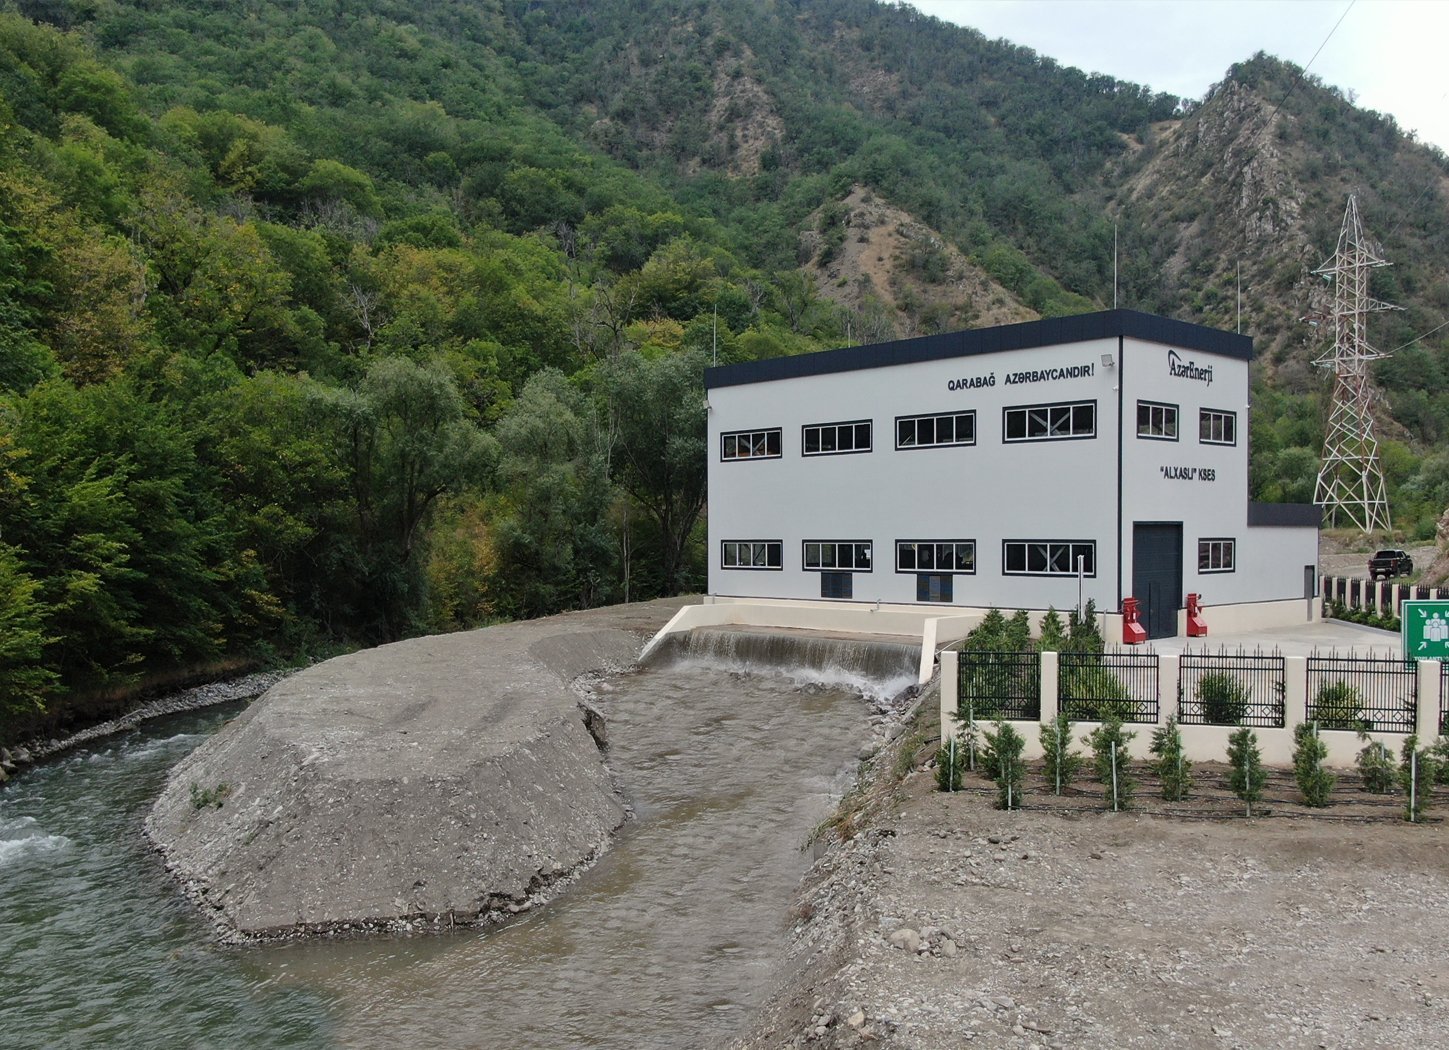 Azerbaijan airs commissioning of new hydropower plants in its Lachin this year